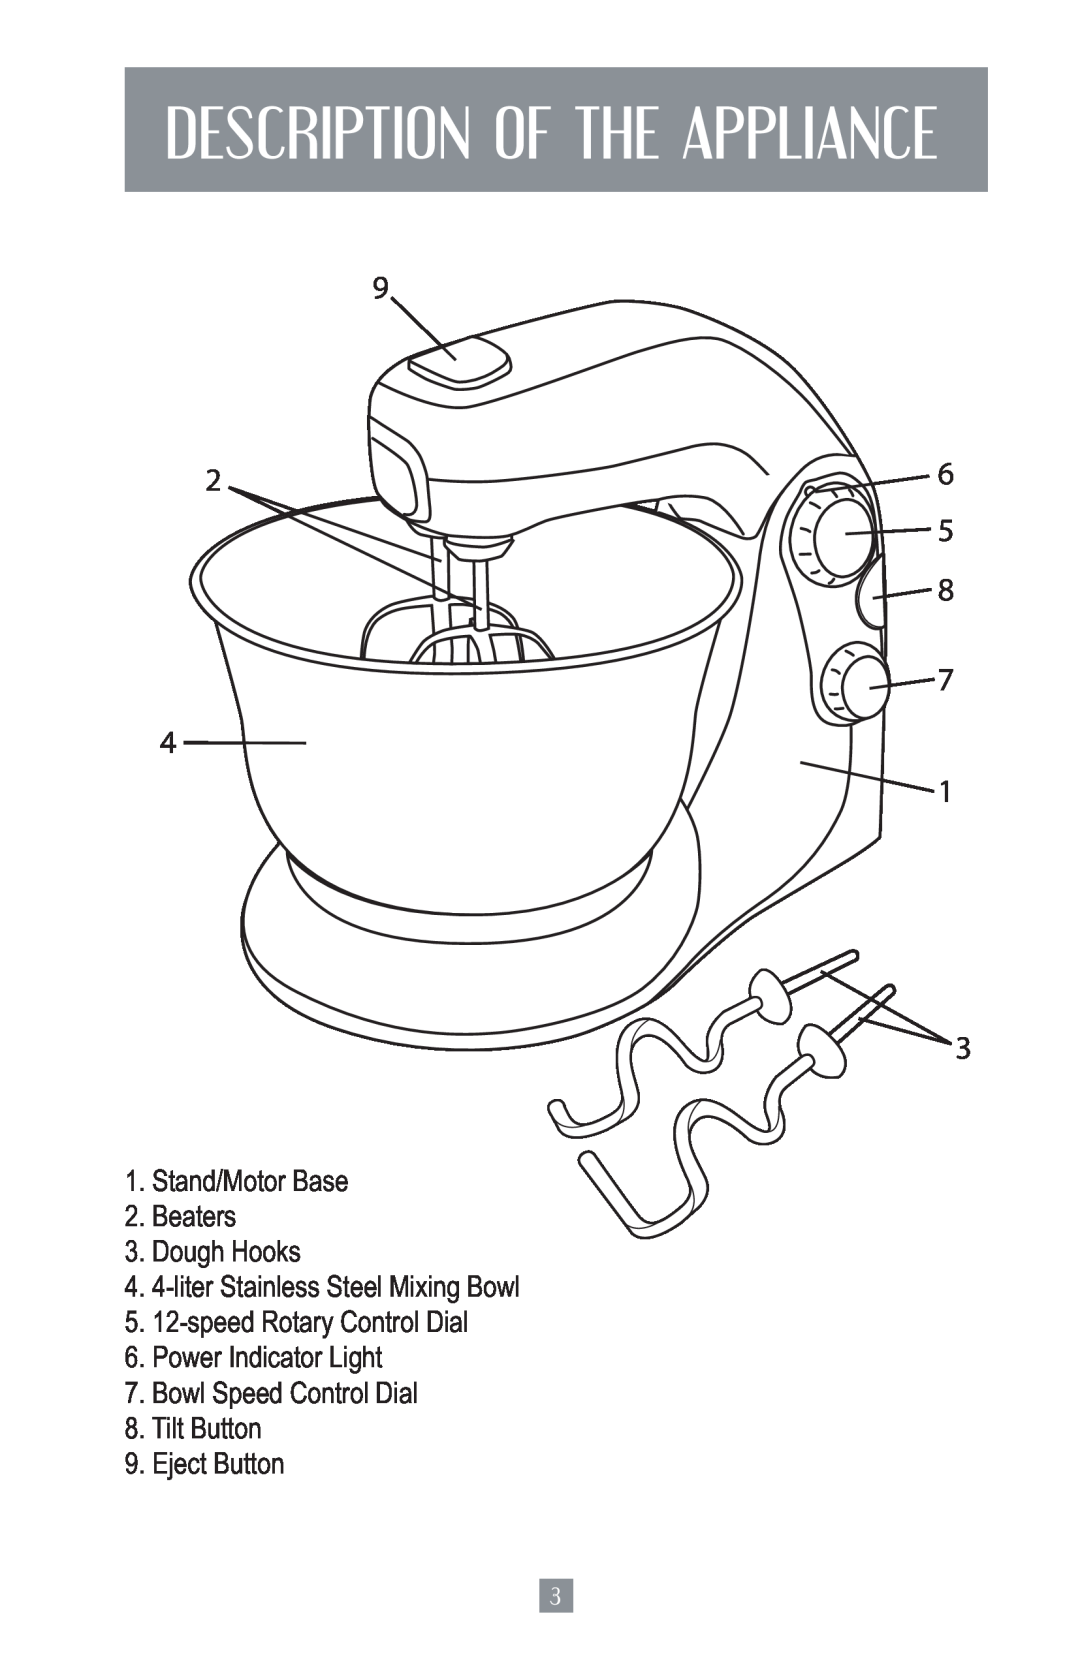 Oster 2700 Description Of The Appliance, Stand/Motor Base 2. Beaters 3.Dough Hooks, literStainless Steel Mixing Bowl 